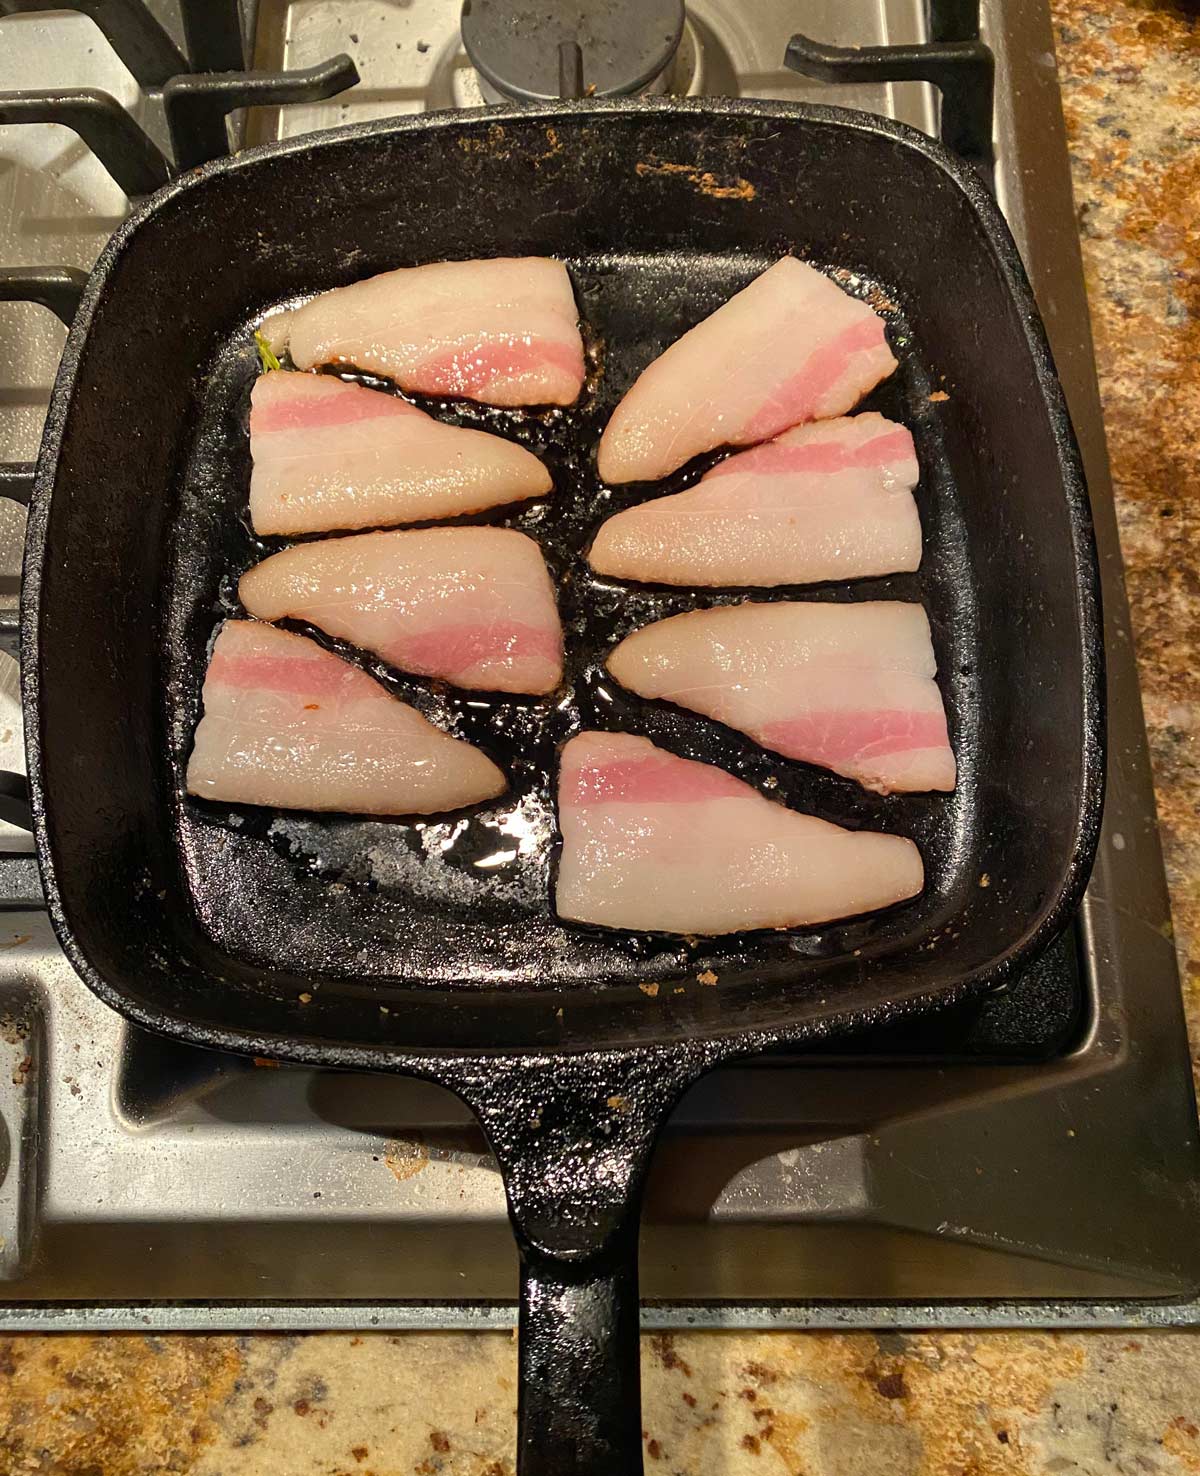 The bacon in our HelloFresh box this week